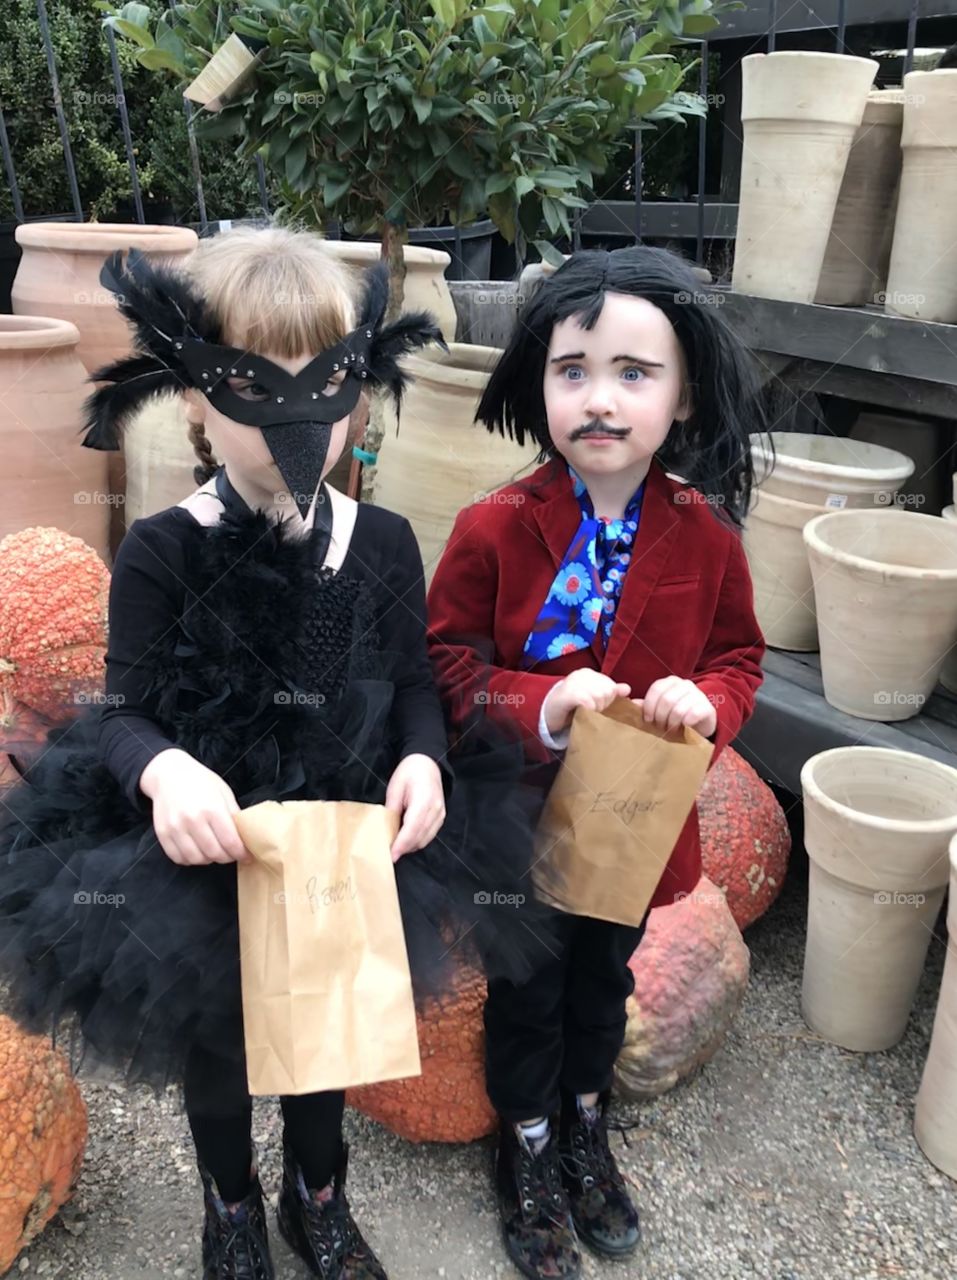 Children trick or treating as Edgar Allan Poe and Raven